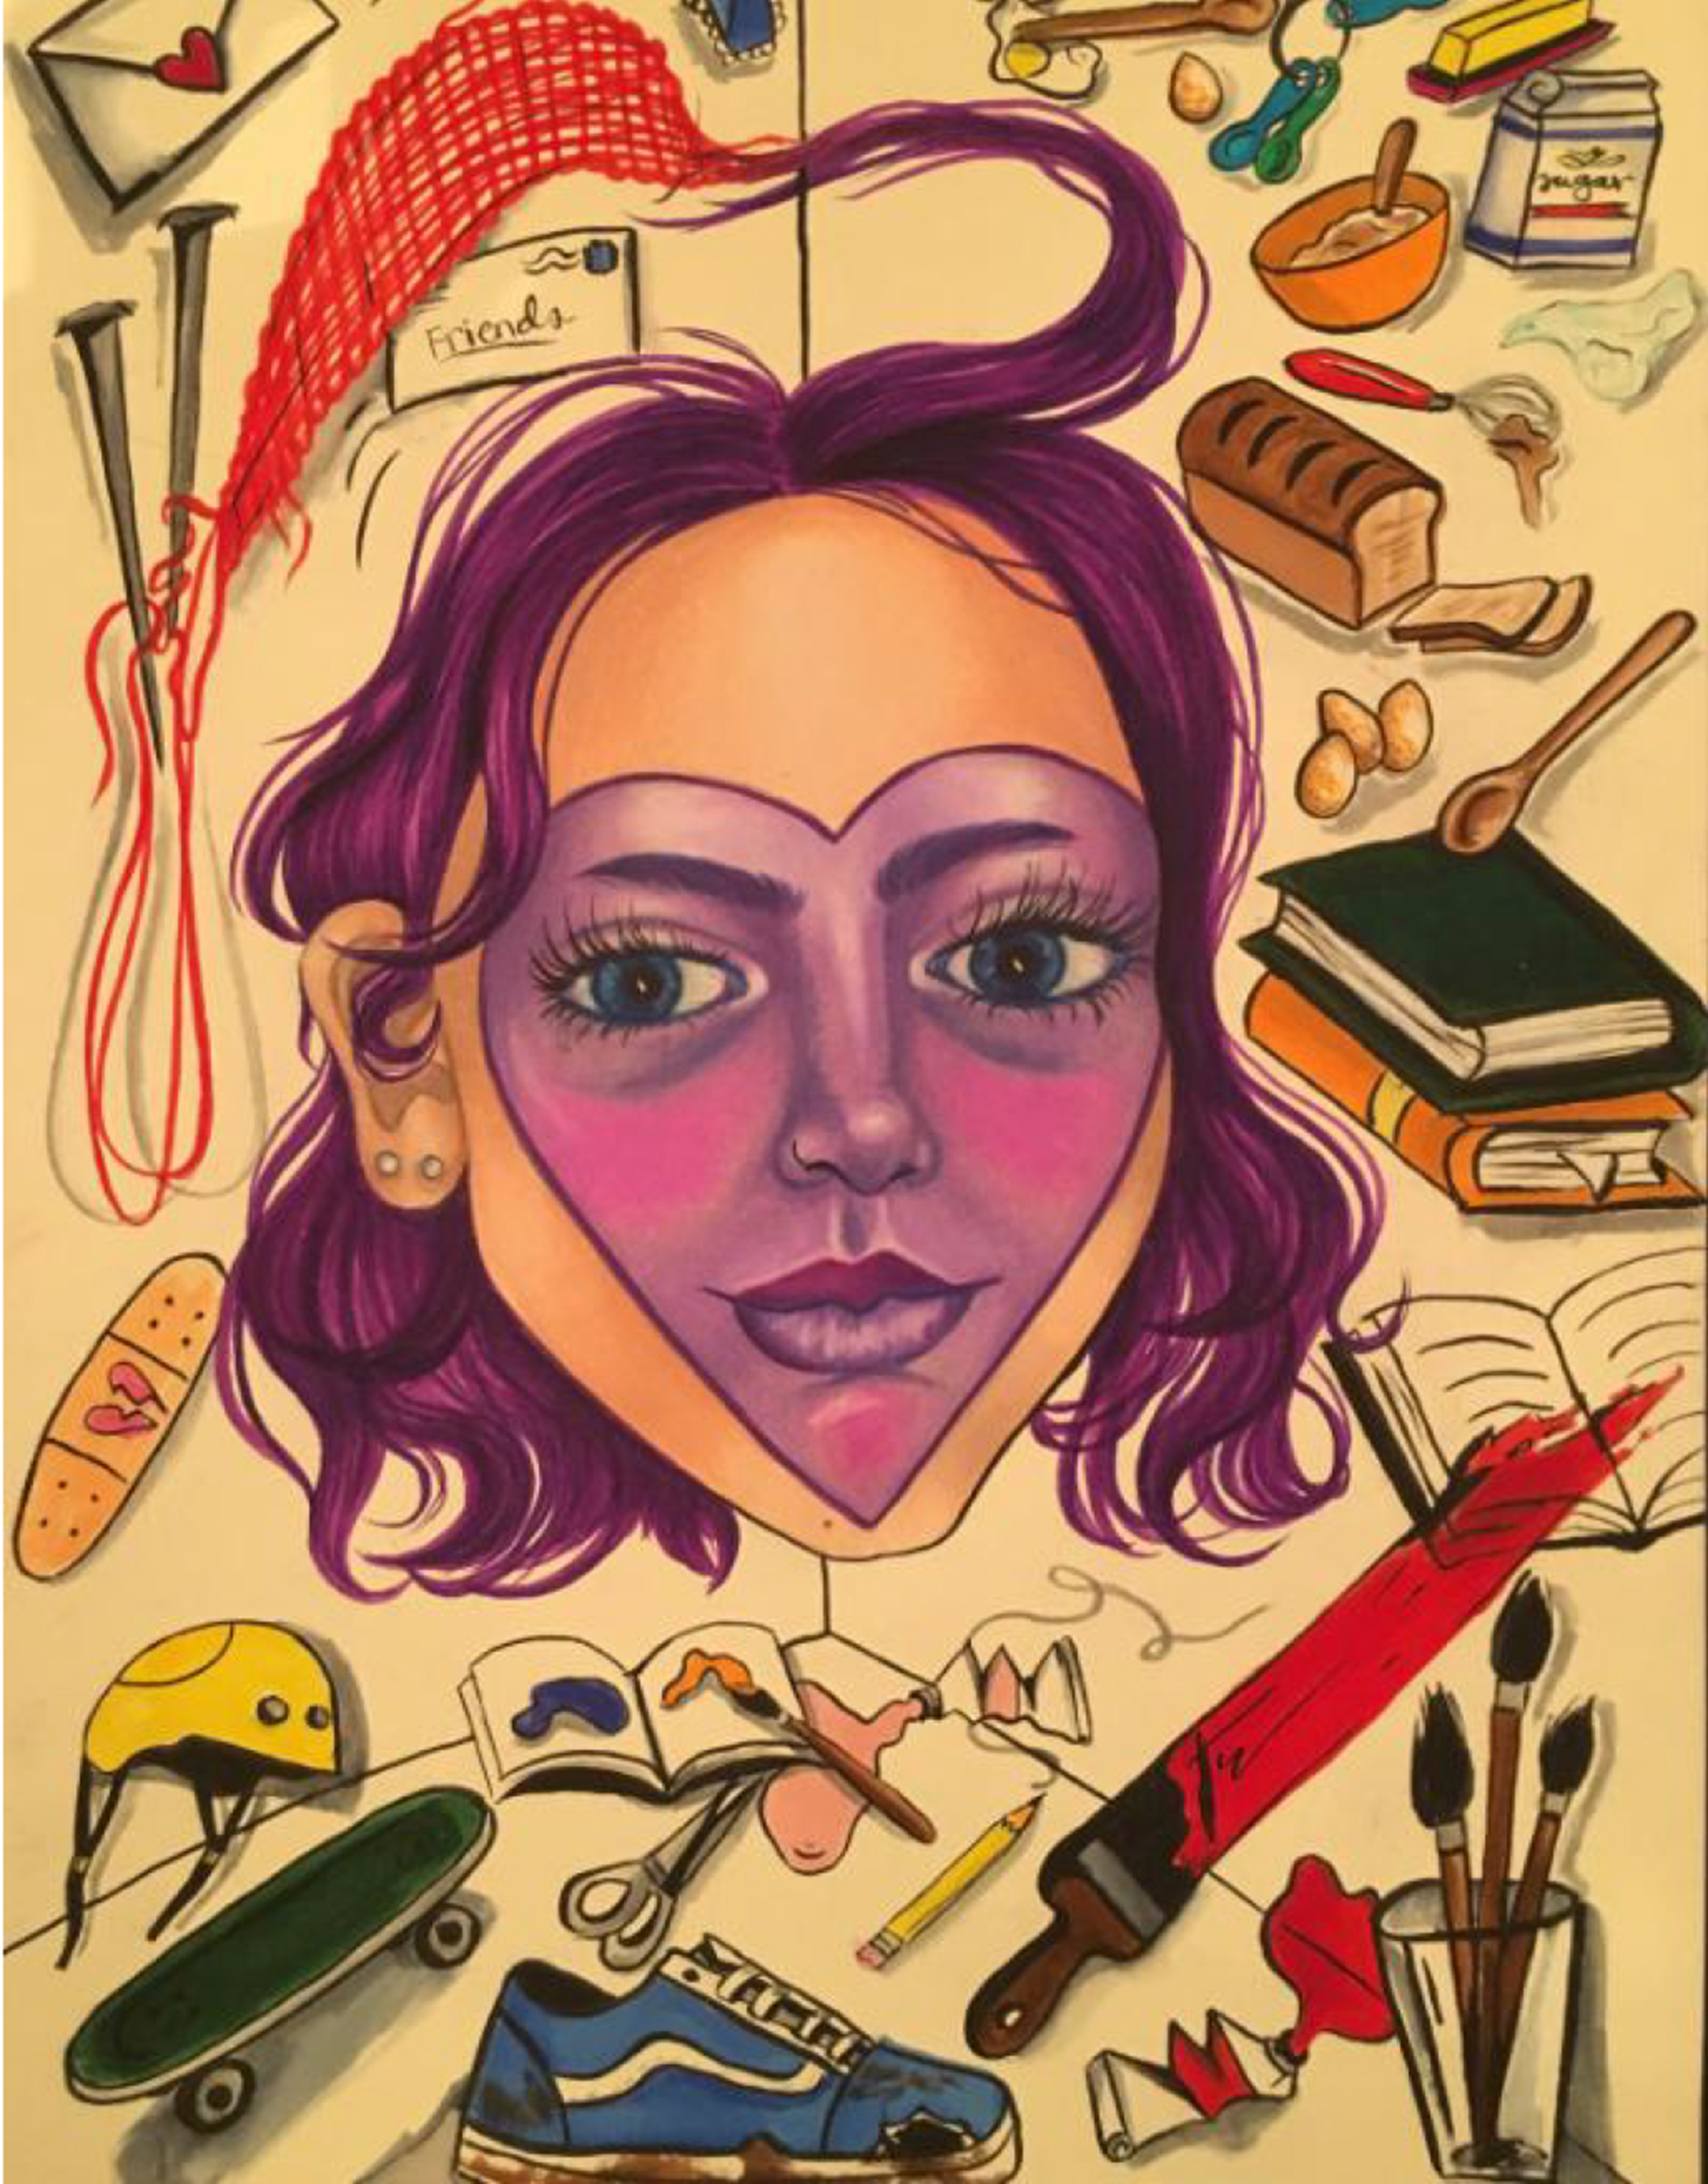 Collage of images -- books, sneakers, skateboards, pens and pencils and paintbrushes -- surrounding the head of a young woman, smiling gently with a heart over her face